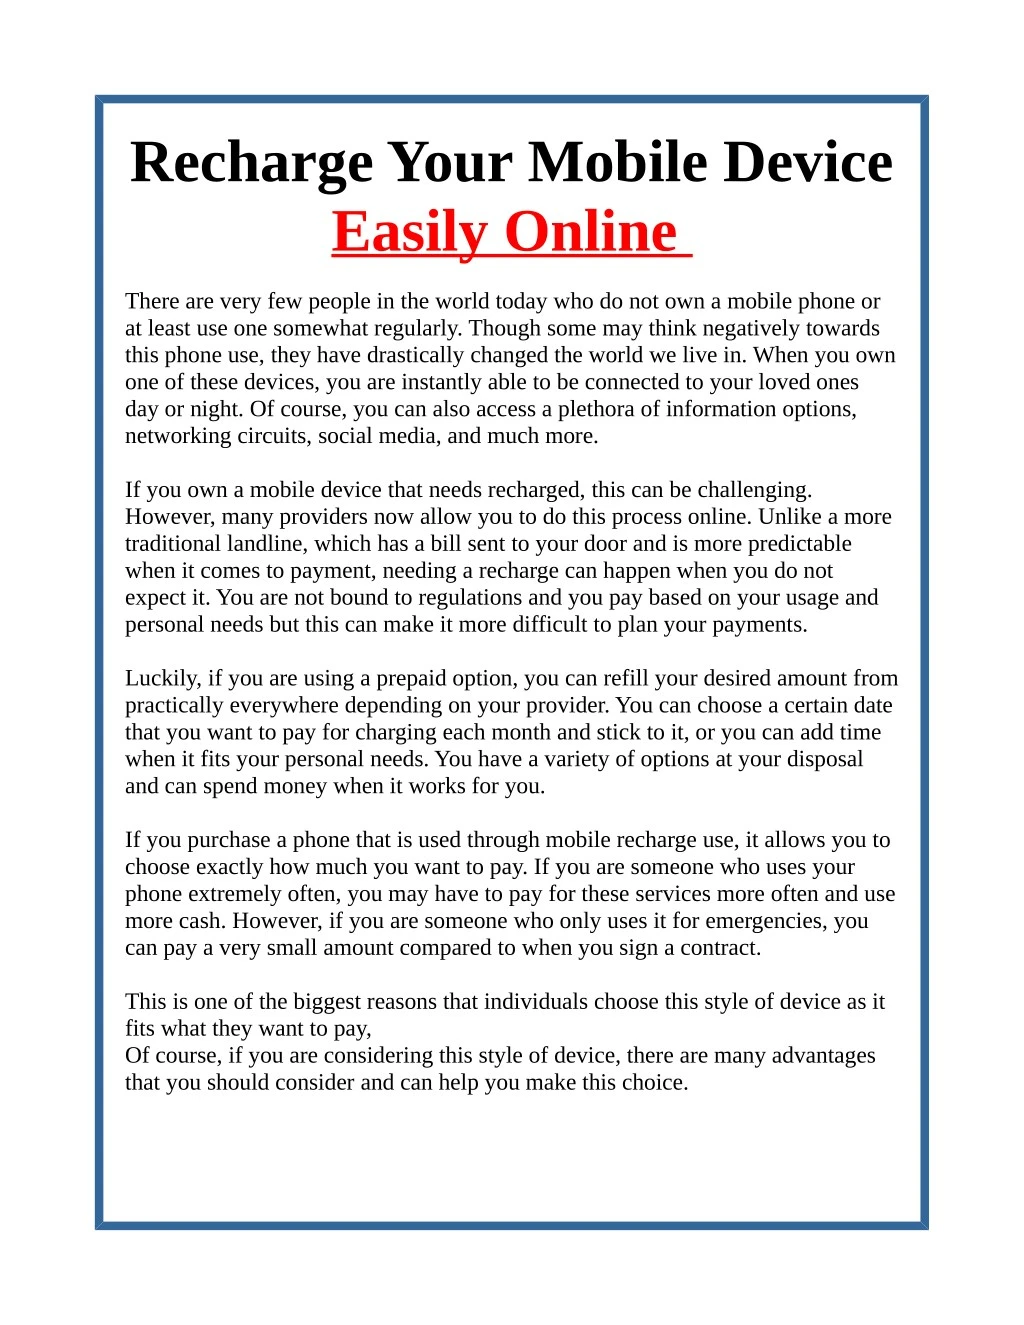 recharge your mobile device easily online